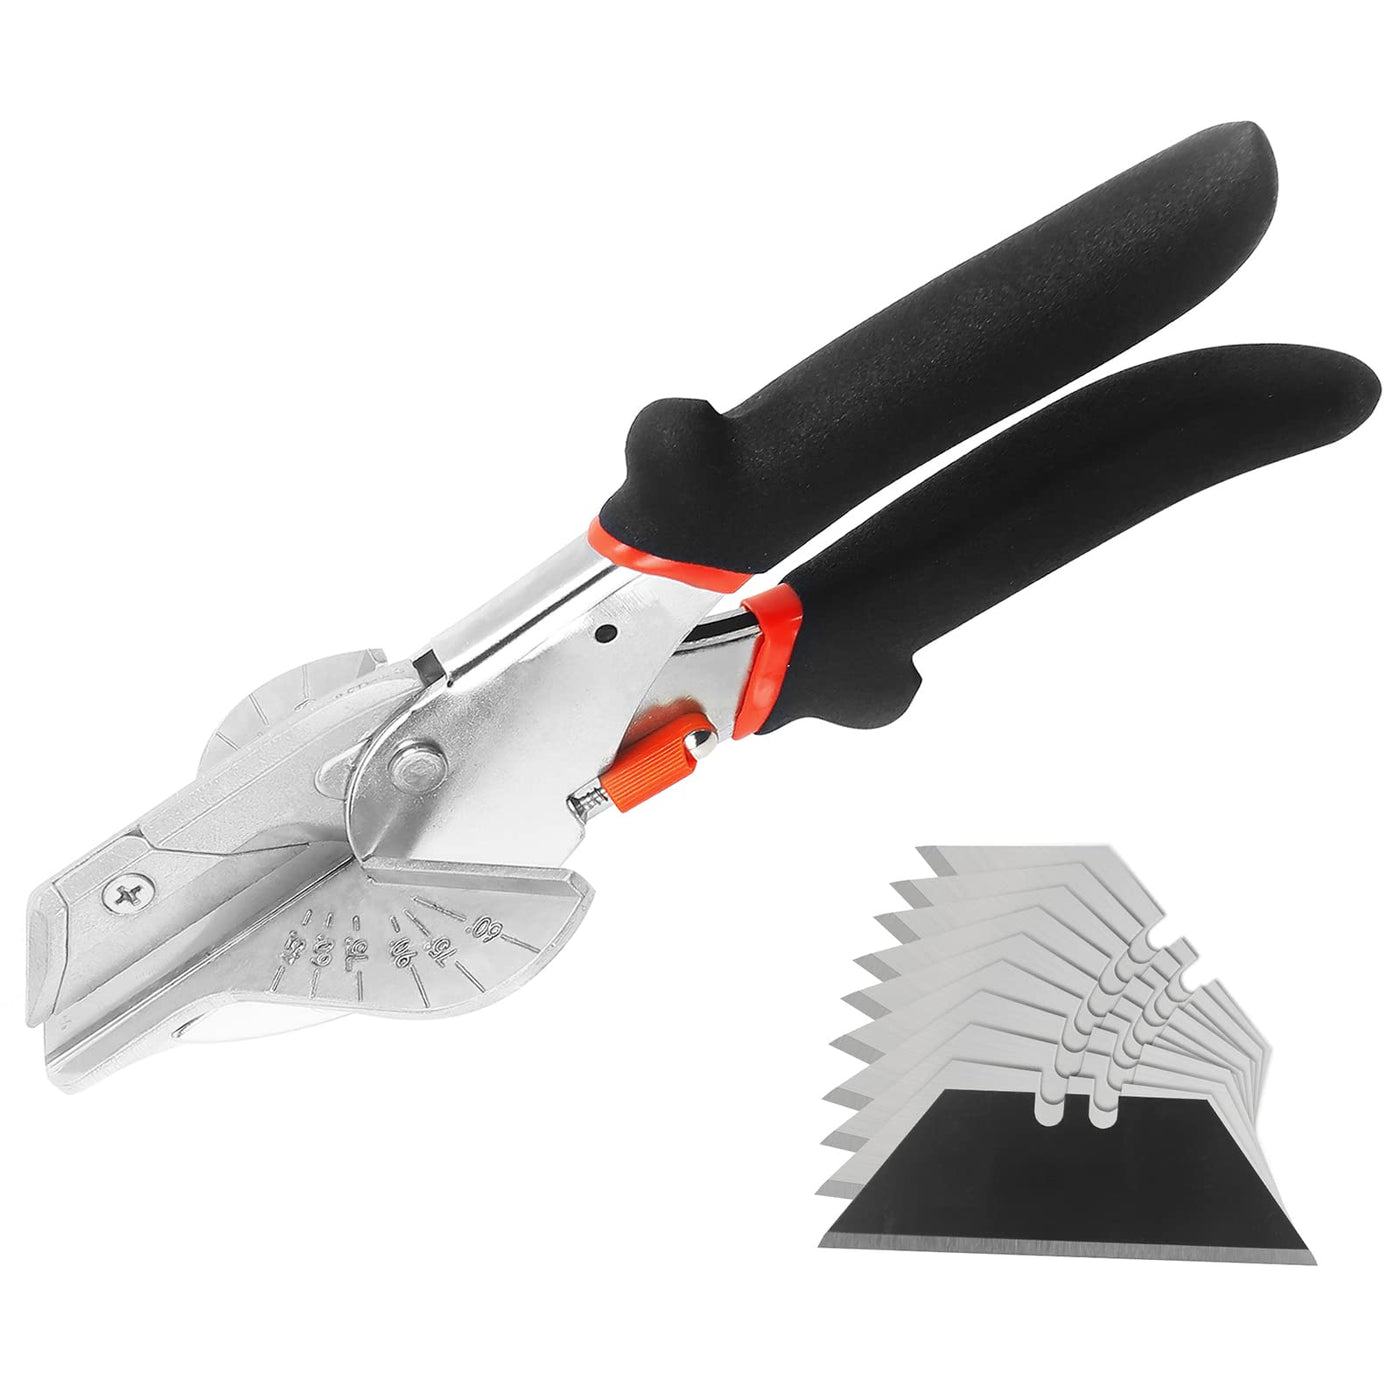 Miter Shears- Trunking Shears for Angular Cutting of Moulding and Trim at  45 Degree, 60, 90 Degree Angles, by American Heritage Industries 